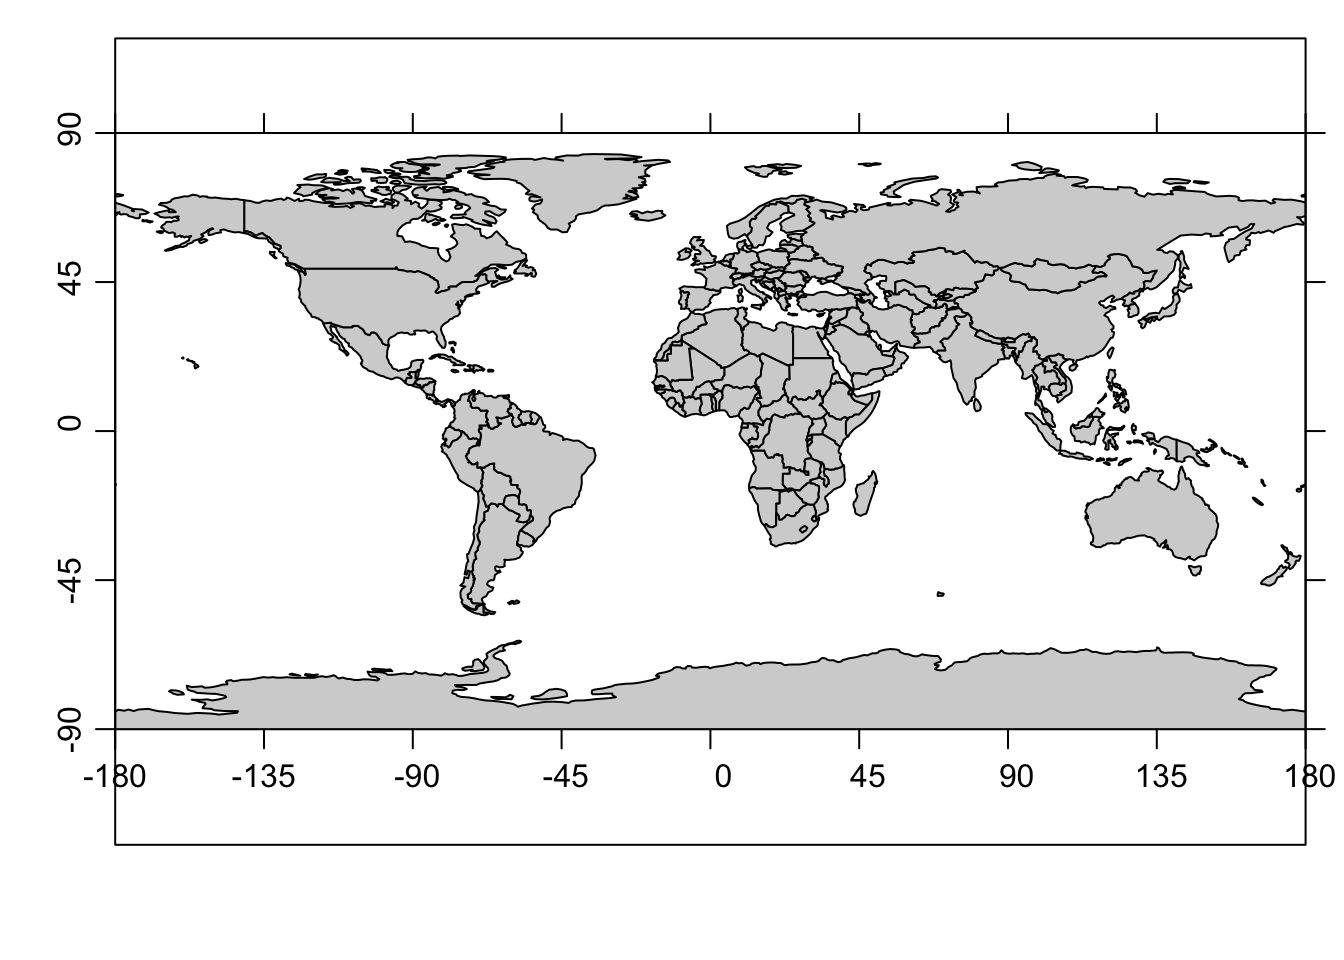 Generic coastline plot with a Cartesian projection.